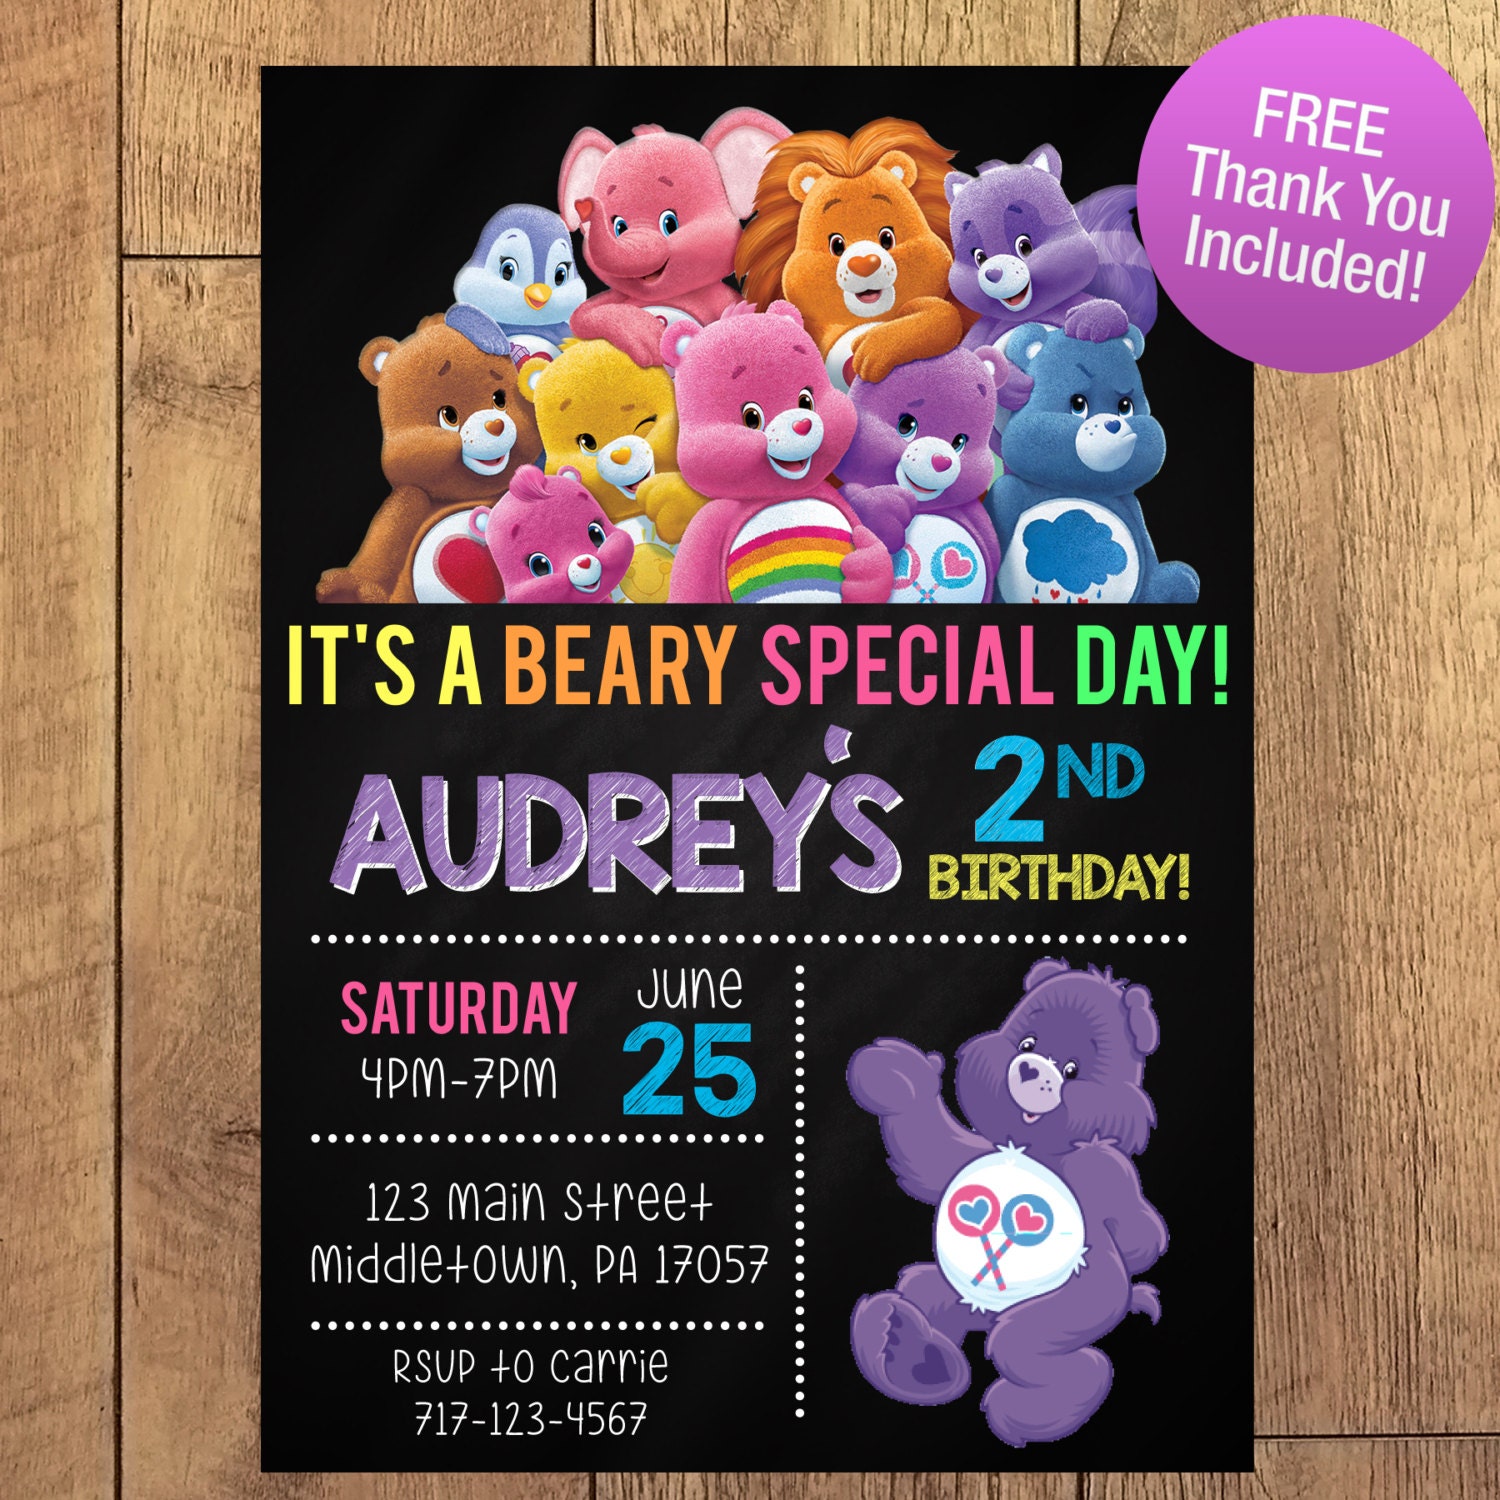 Care Bear Birthday Party Invitation FREE THANK YOU Included